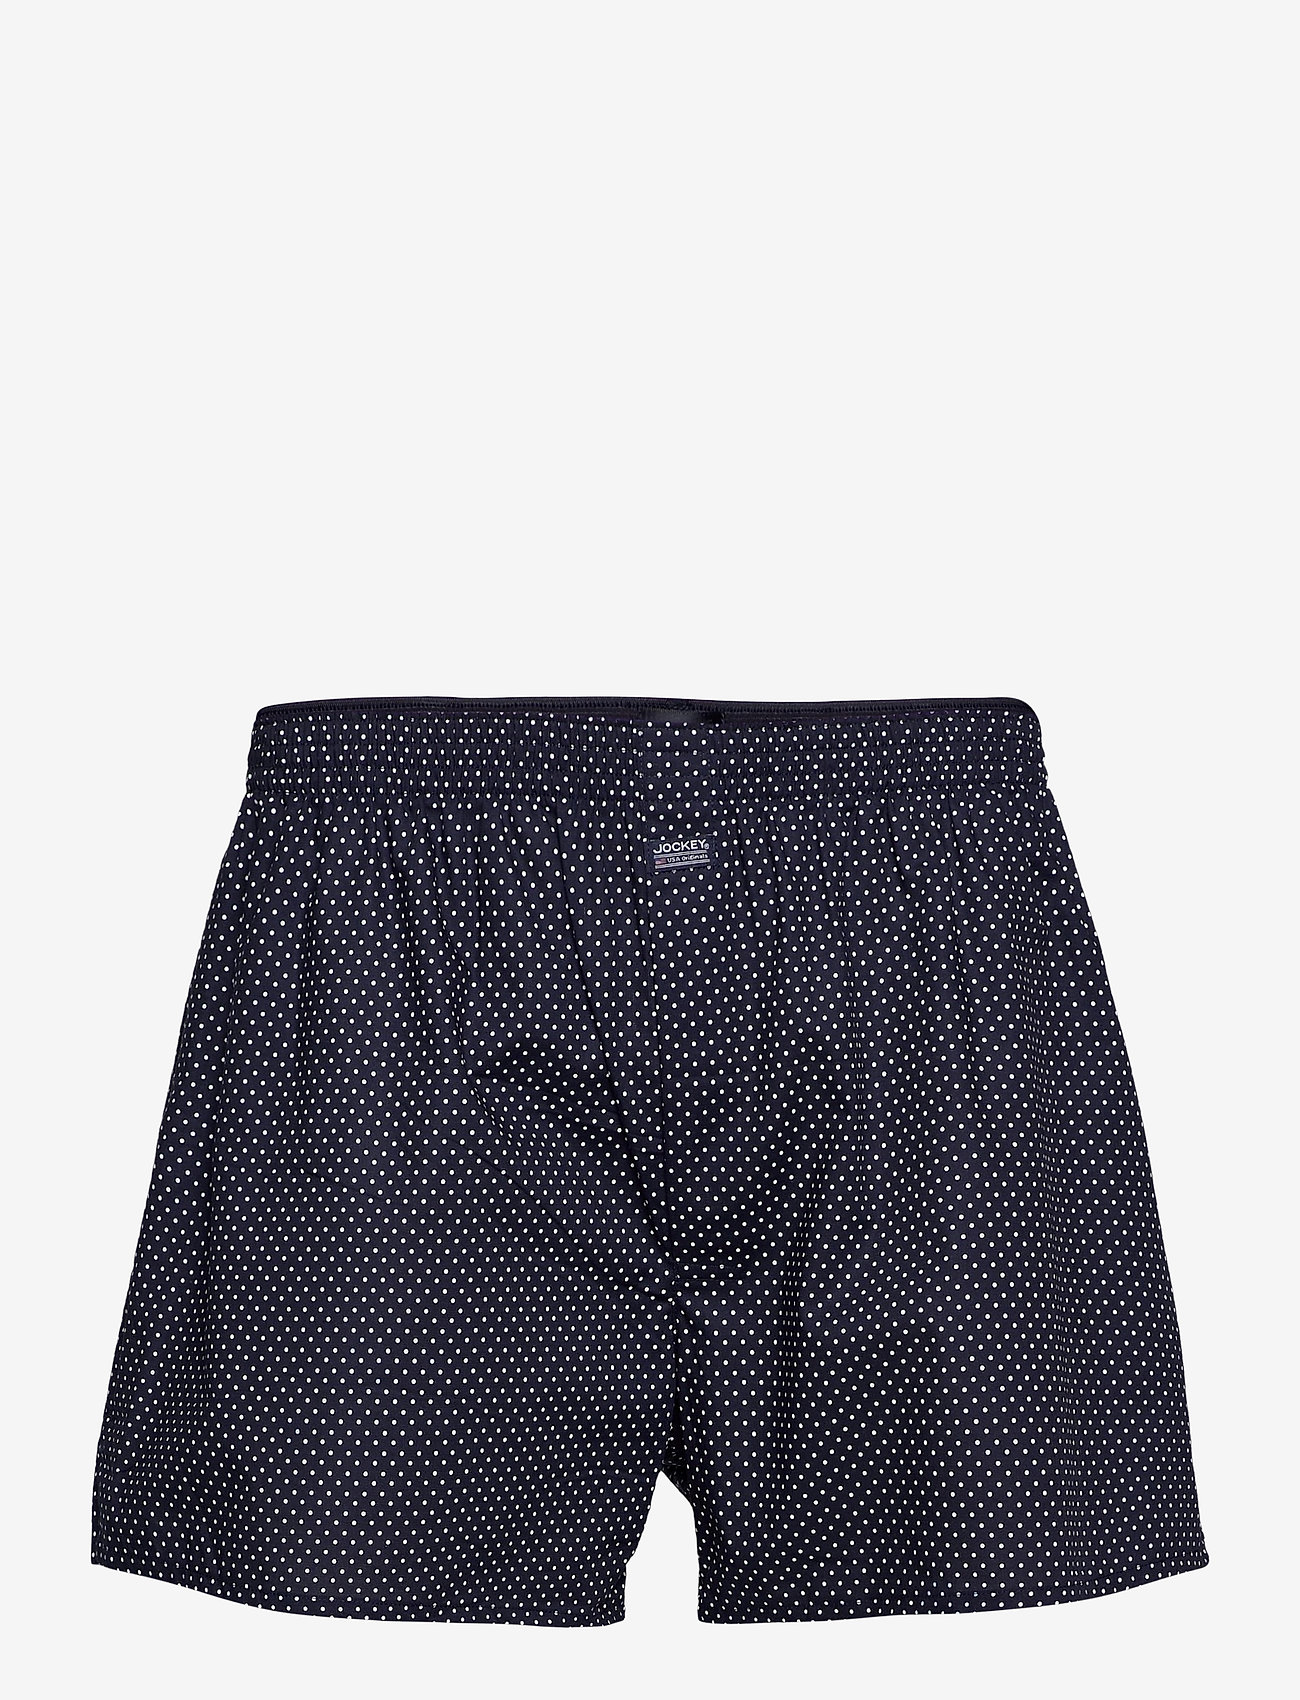 Jockey - Boxer woven 1-p - lowest prices - navy - 0